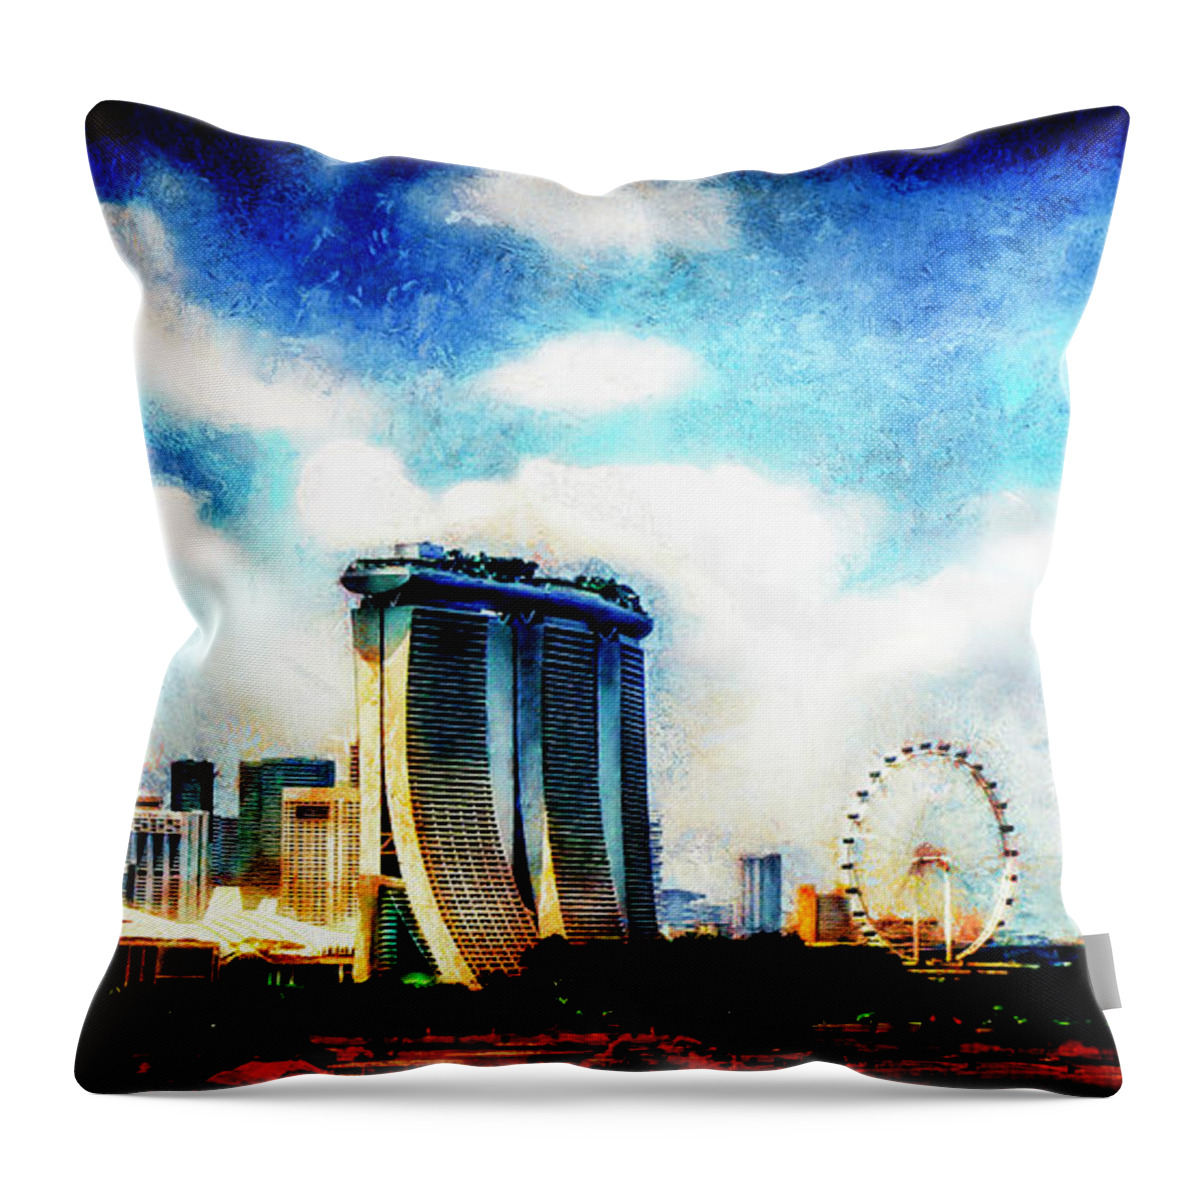  Throw Pillow featuring the mixed media Marina Bay Sands #1 by Joseph Hollingsworth